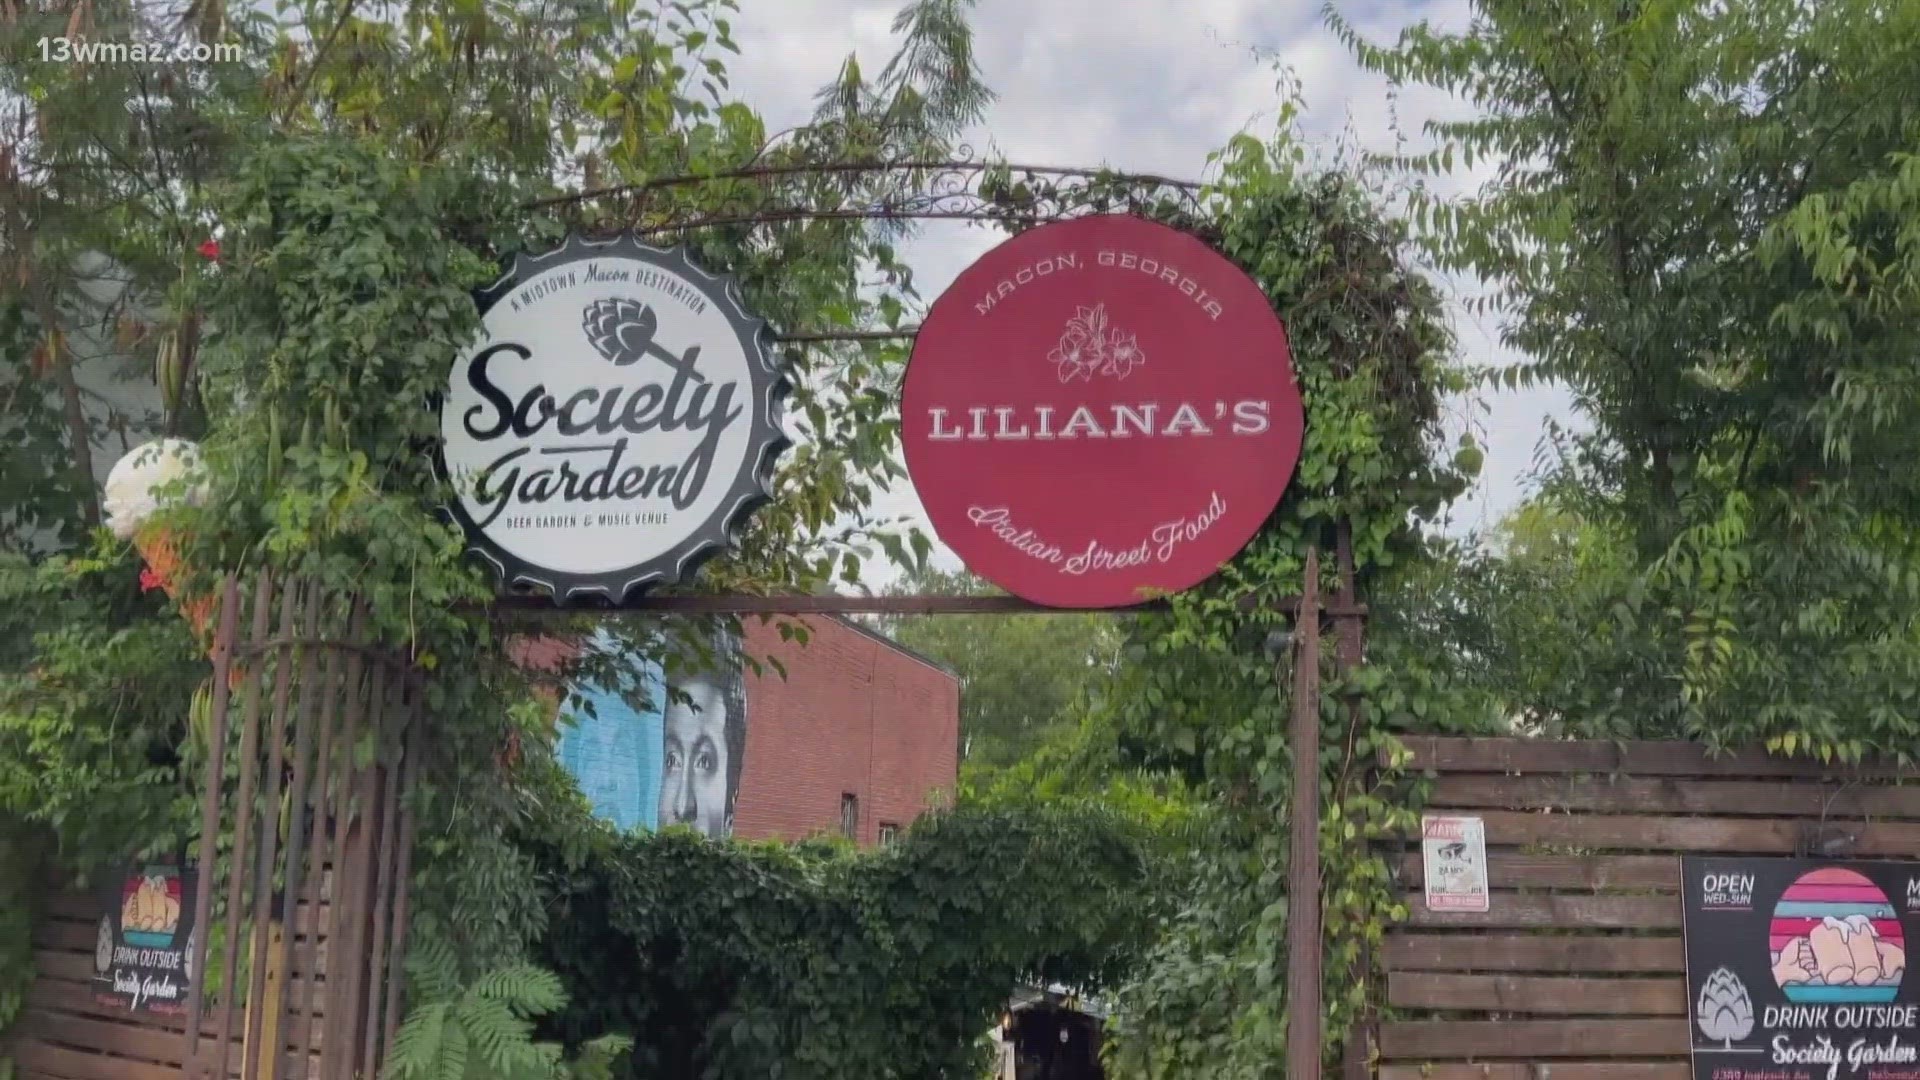 After a string of successful food trucks popping up shop temporarily at the Society Garden, they've opened up something a tad bit more permanent with Liliana's.